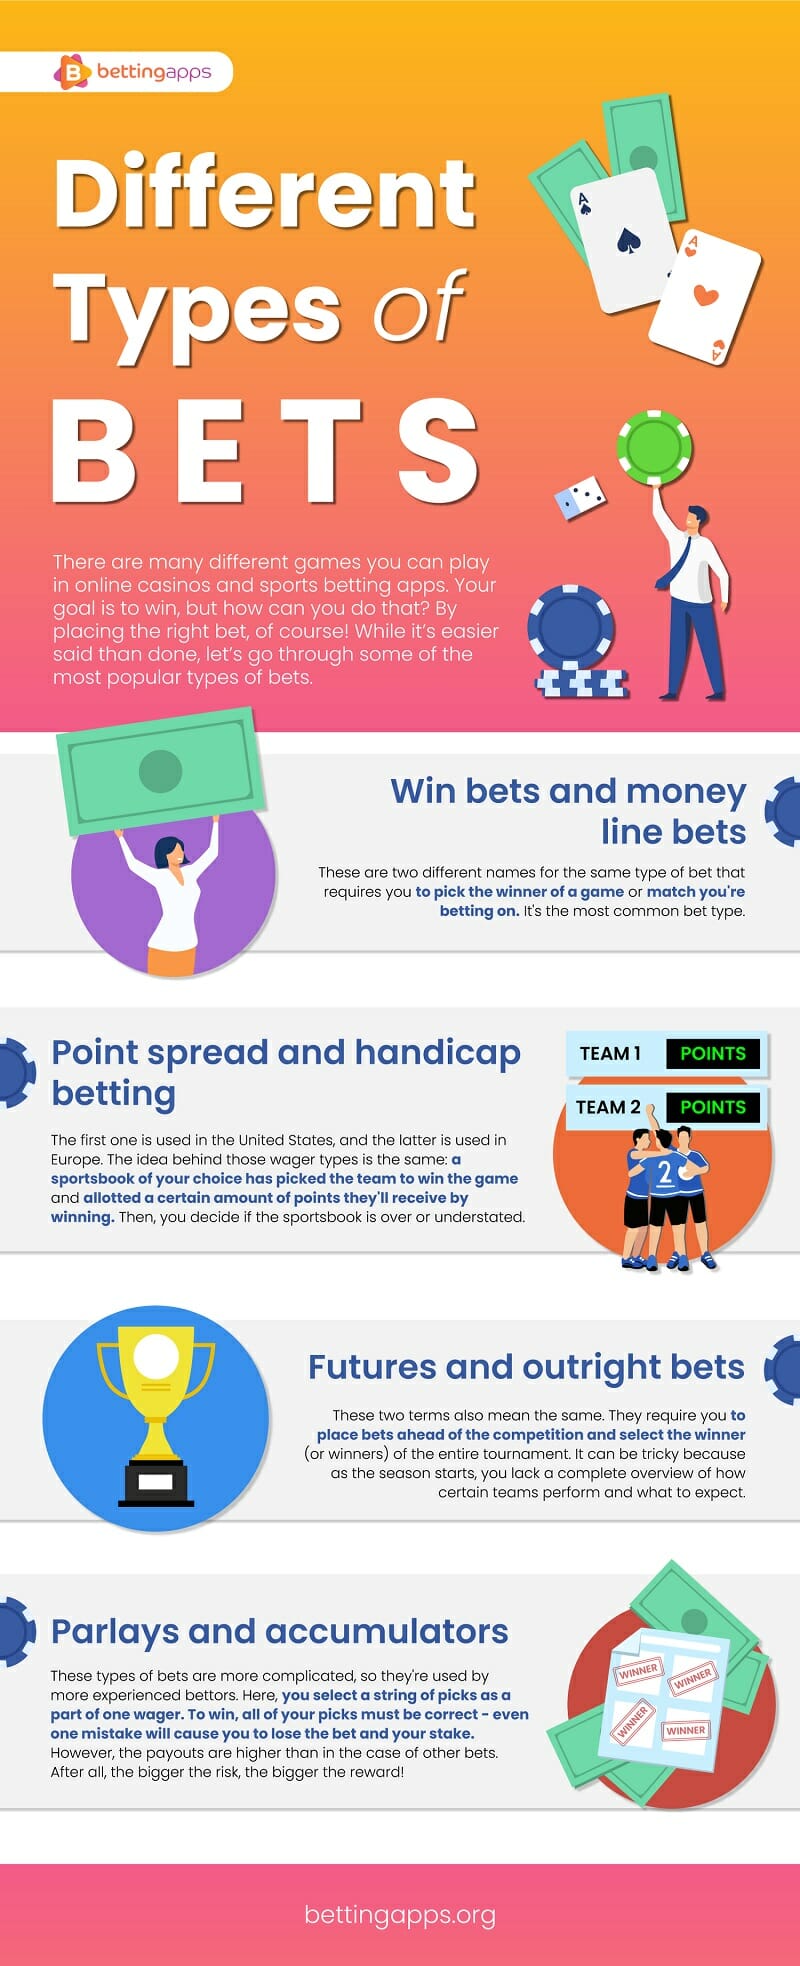 Different types of bets